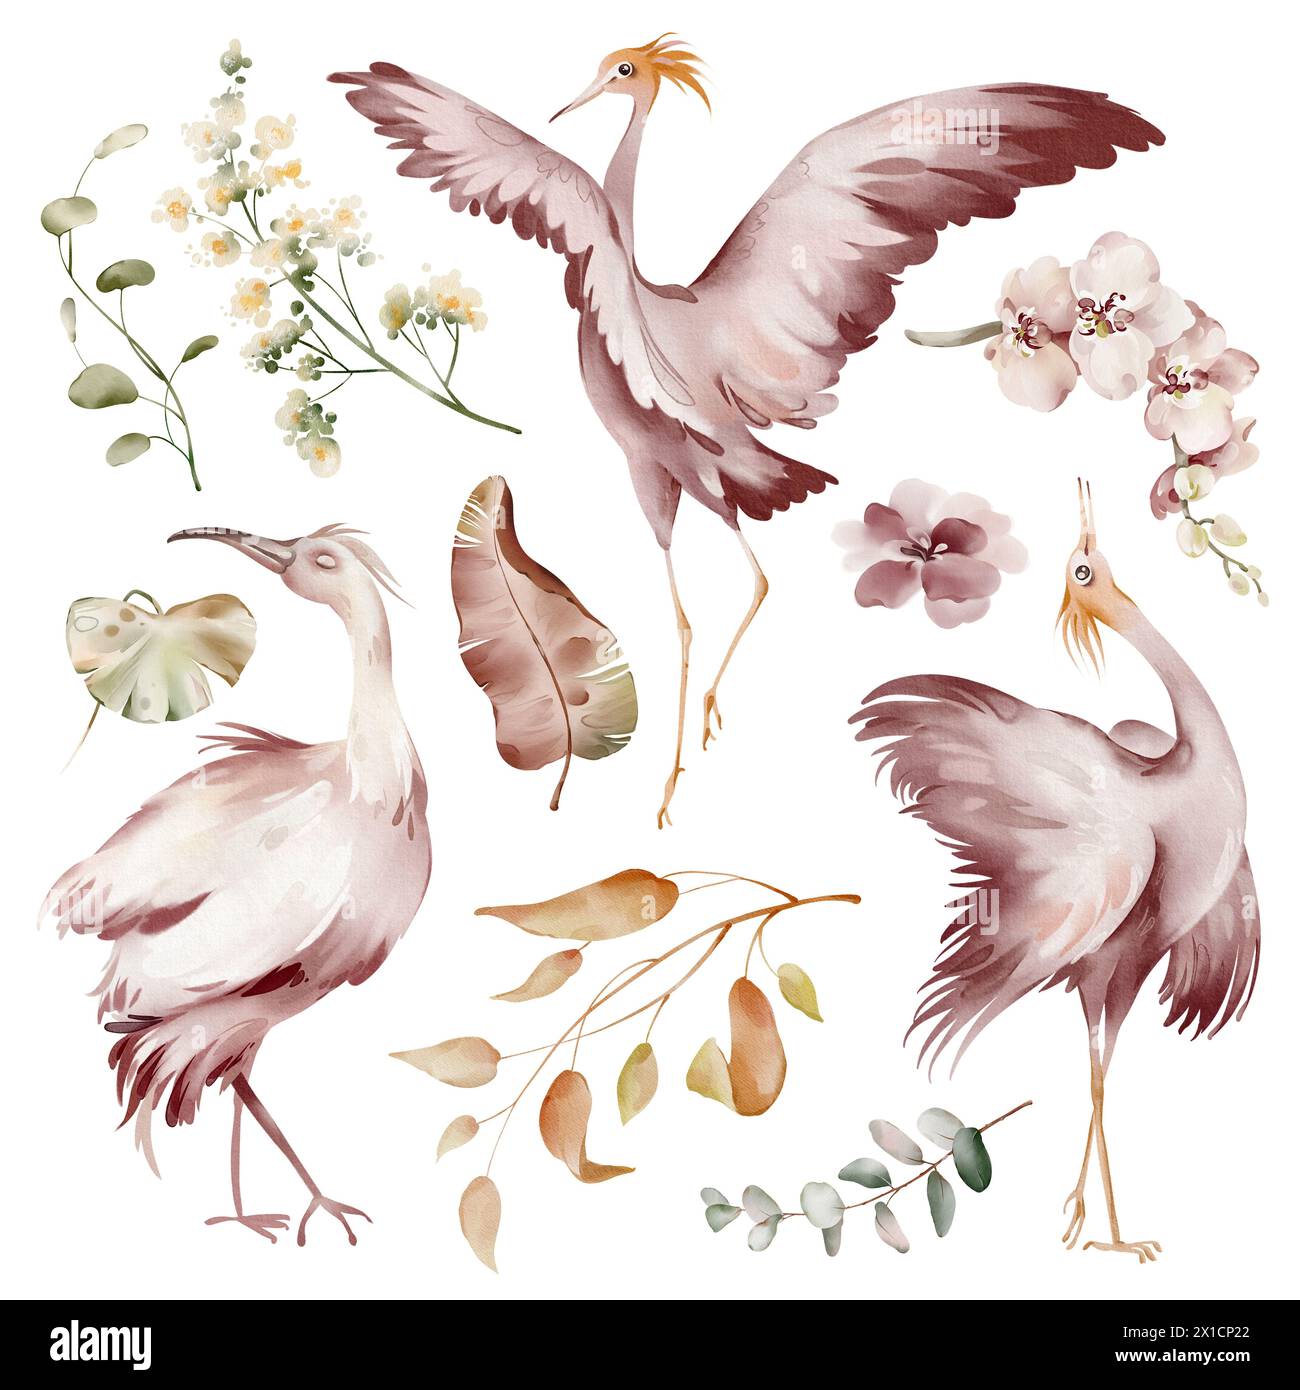 Pink Ibis birds. Watercolor elements of tropical birds, flowers and plants. Banana plants and orchid, Australian flamingo on a white background. Stock Photo